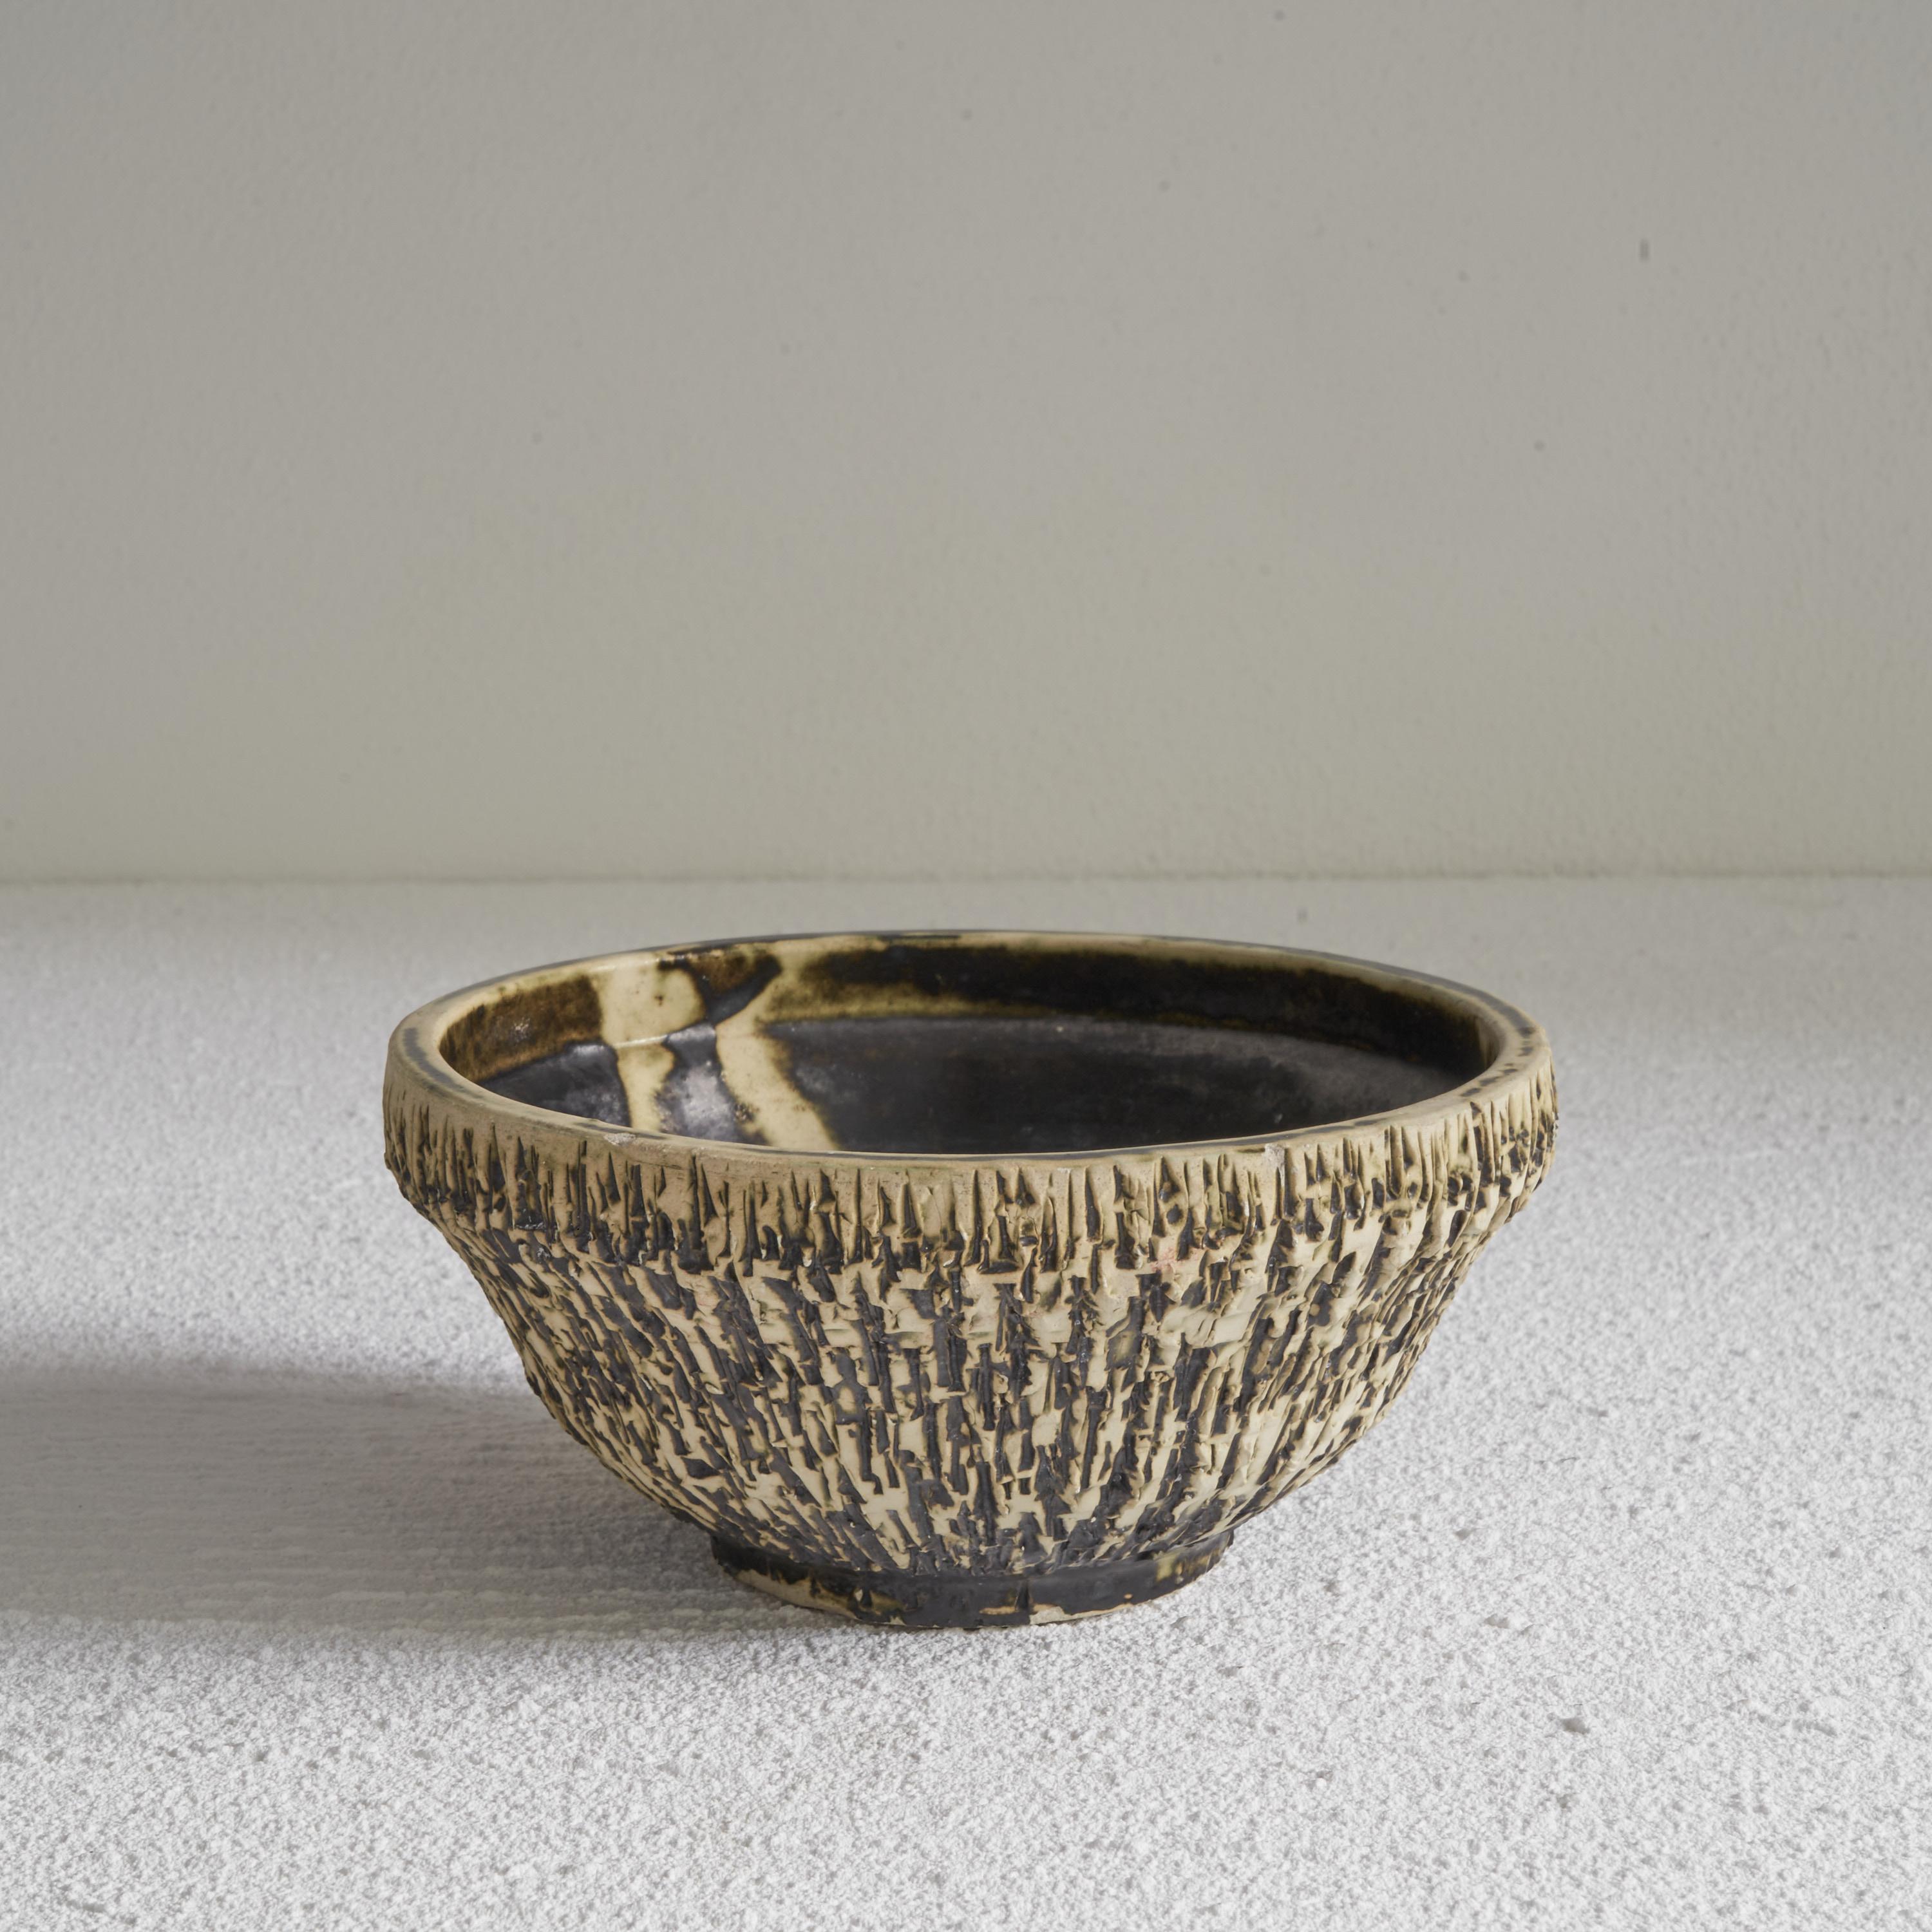 Decorative ‘Birch Bark’ Pottery Bowl, mid 20th century. 

This is a very decorative pottery bowl with a distinct style. The outside is reminiscent of birch bark and gives this bowl an interesting appearance. On the inside great graphical parts of